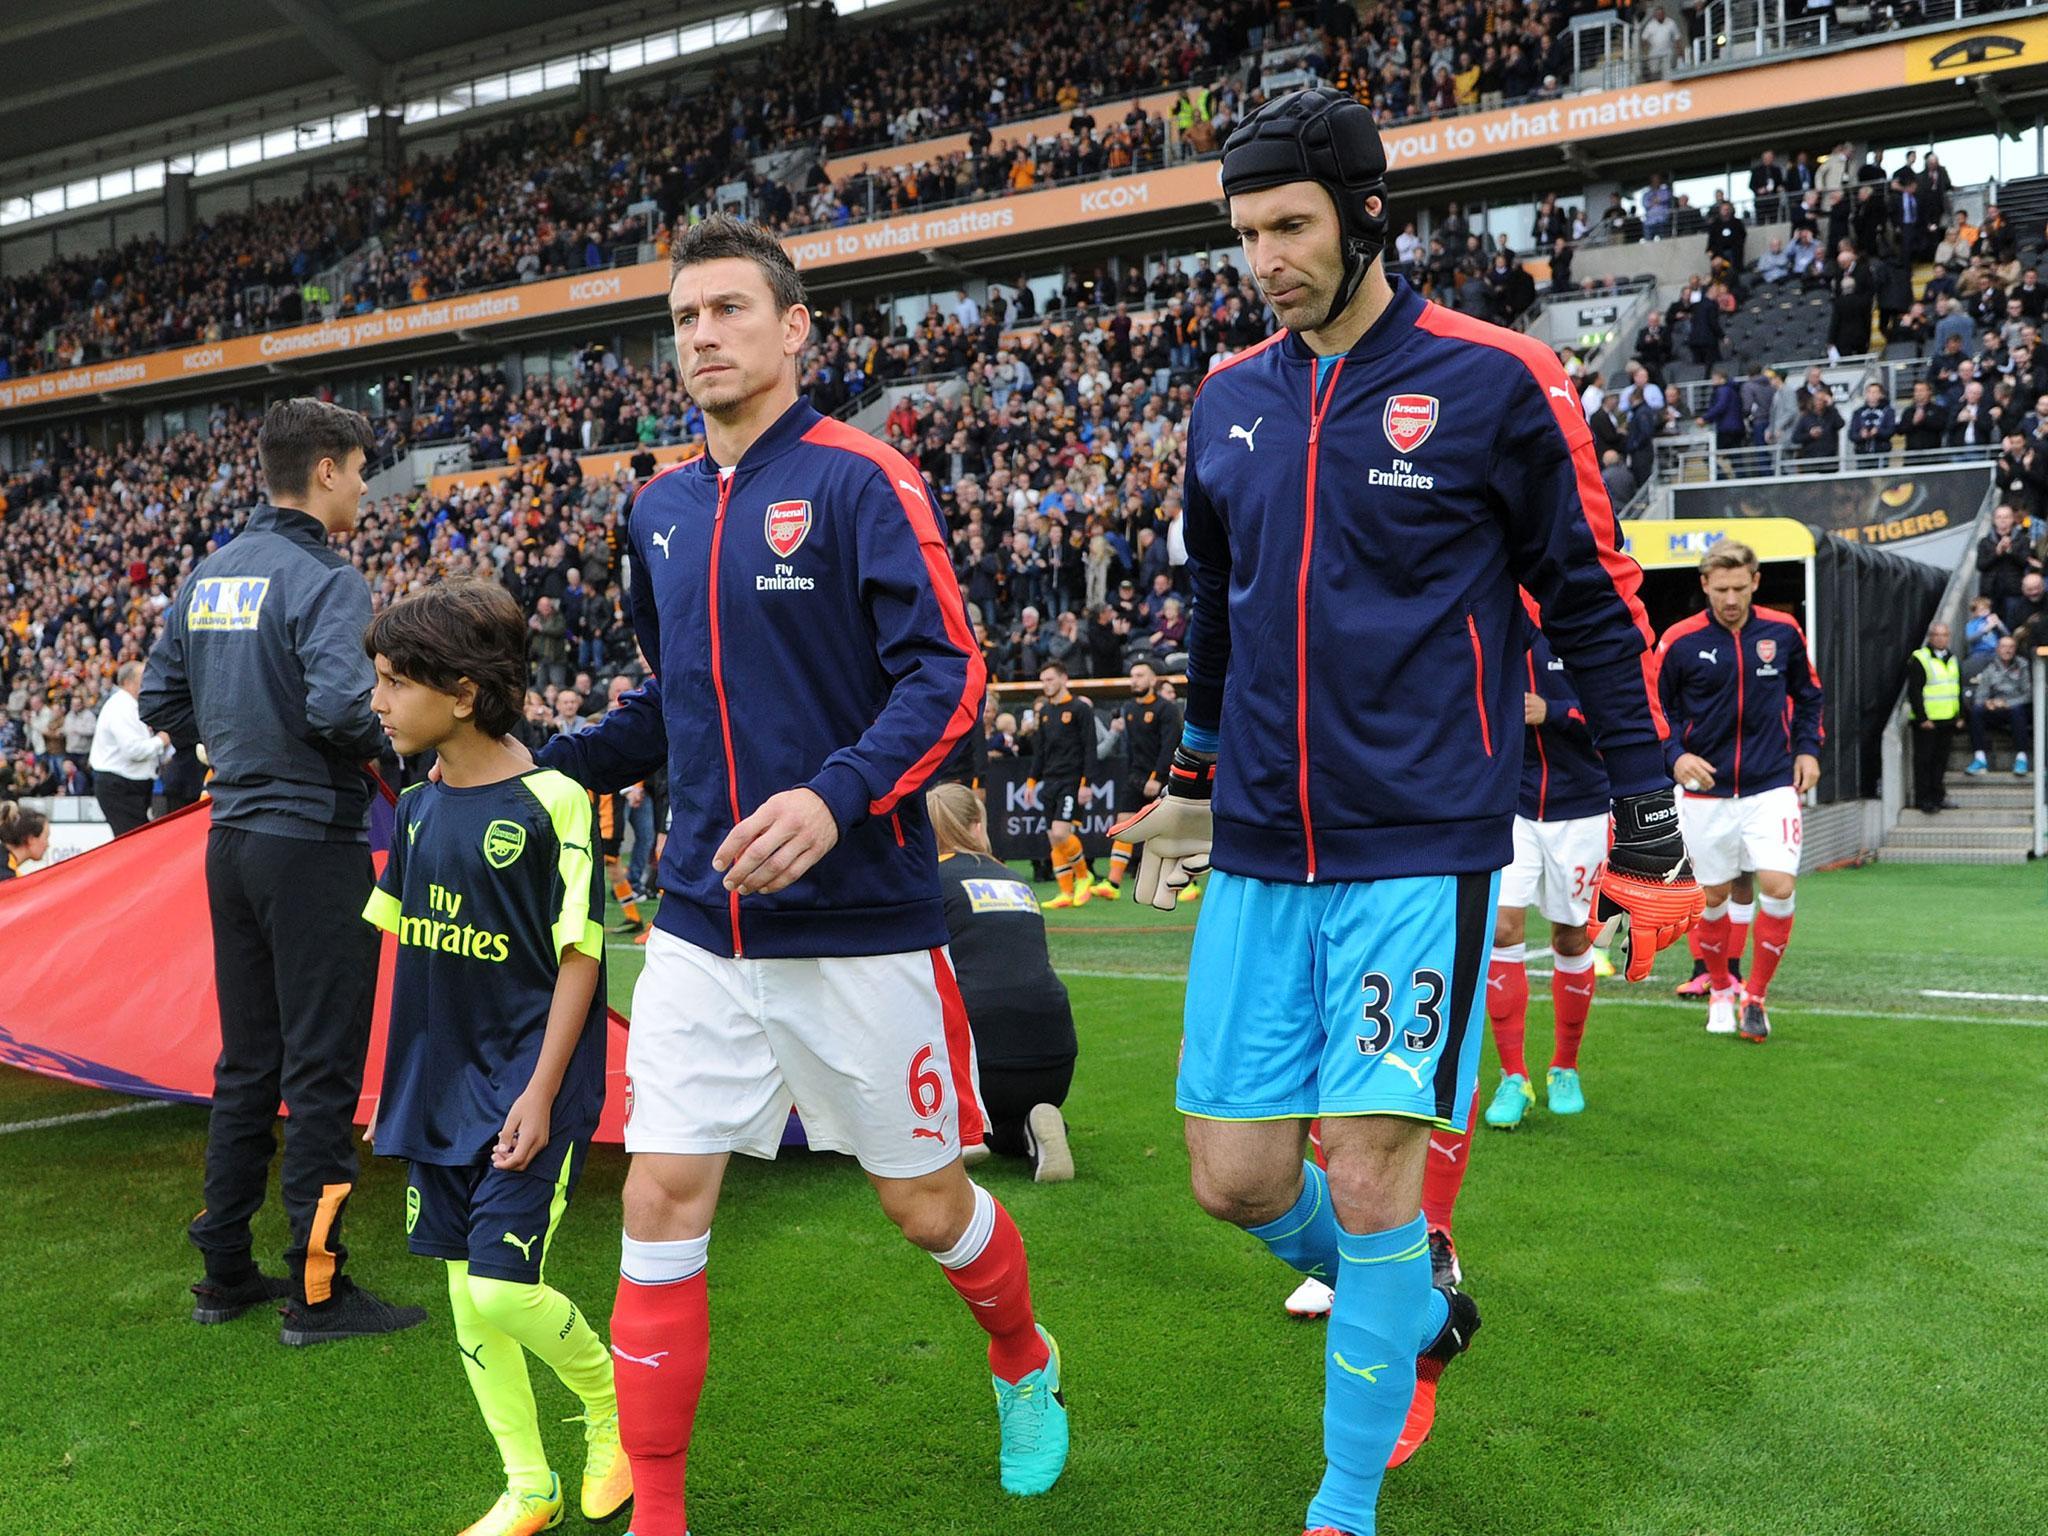 Laurent Koscielny and Petr Cech could return to the Arsenal side to face Middlesbrough